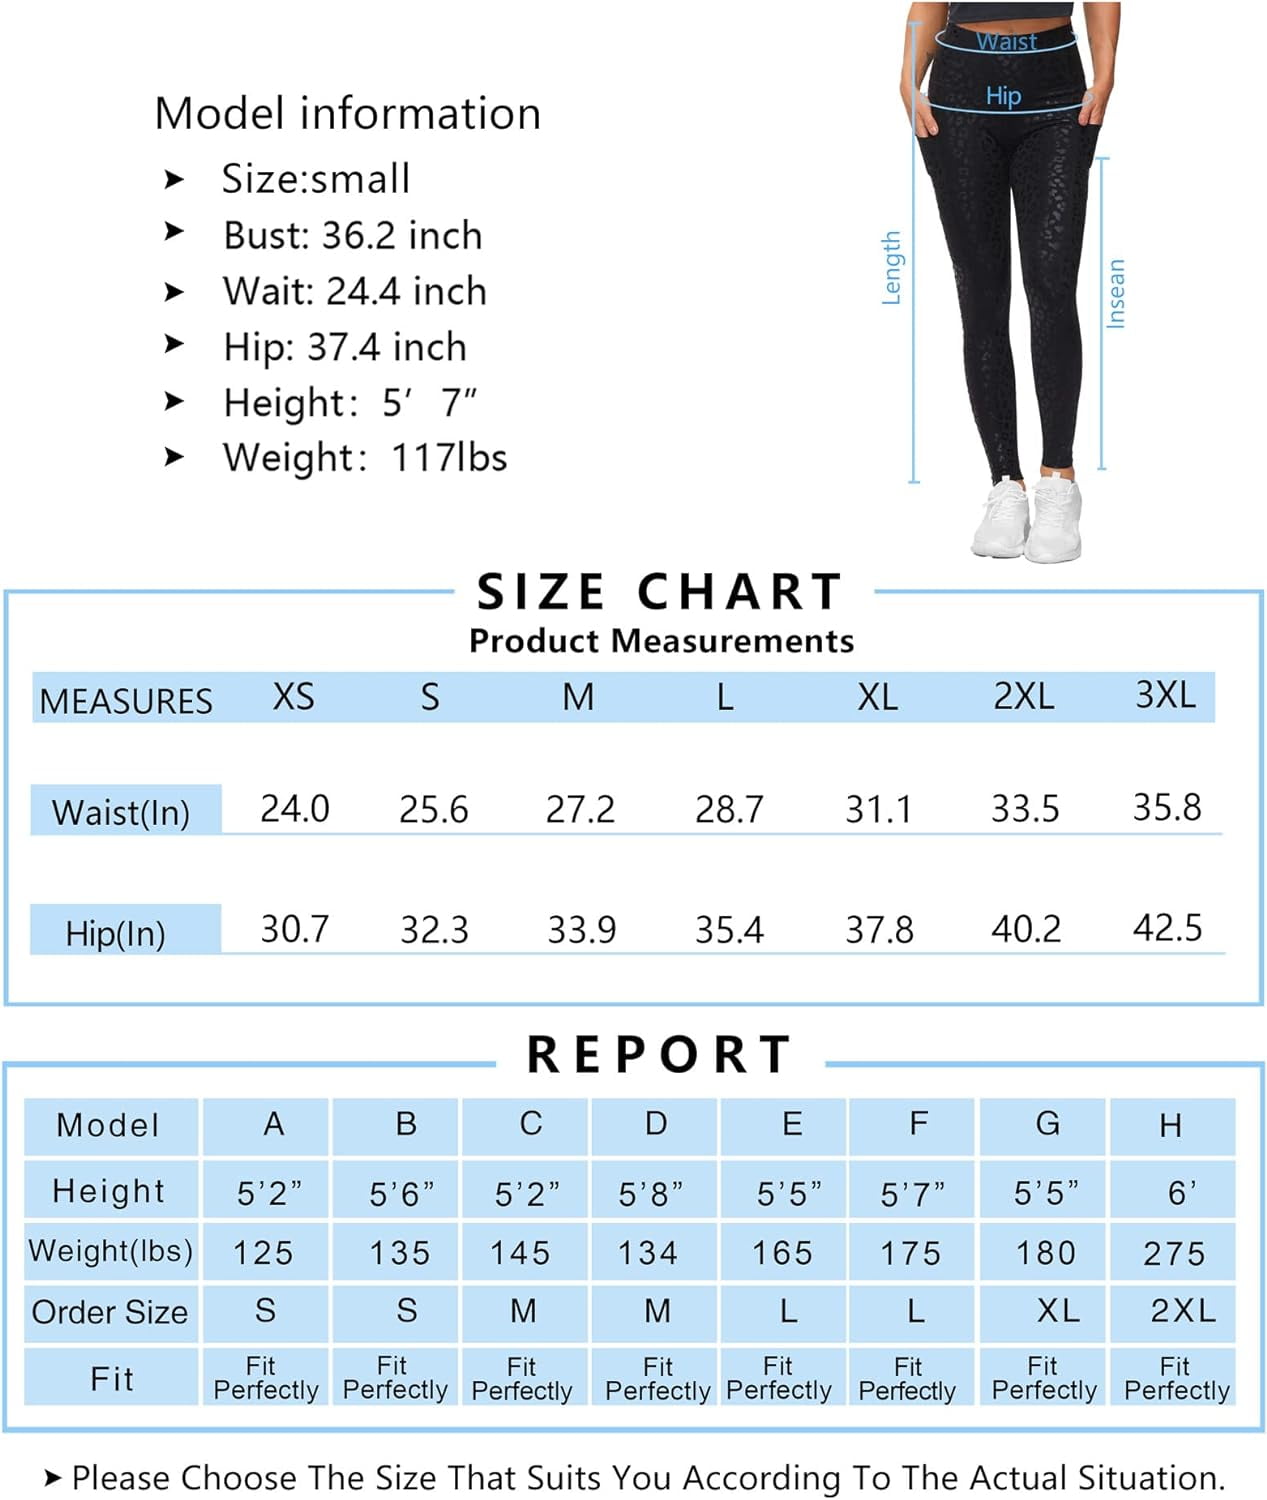 THE GYM PEOPLE Thick High Waist Yoga Pants with Pockets, Tummy Control  Workout Running Yoga Leggings for Women Large Blue 